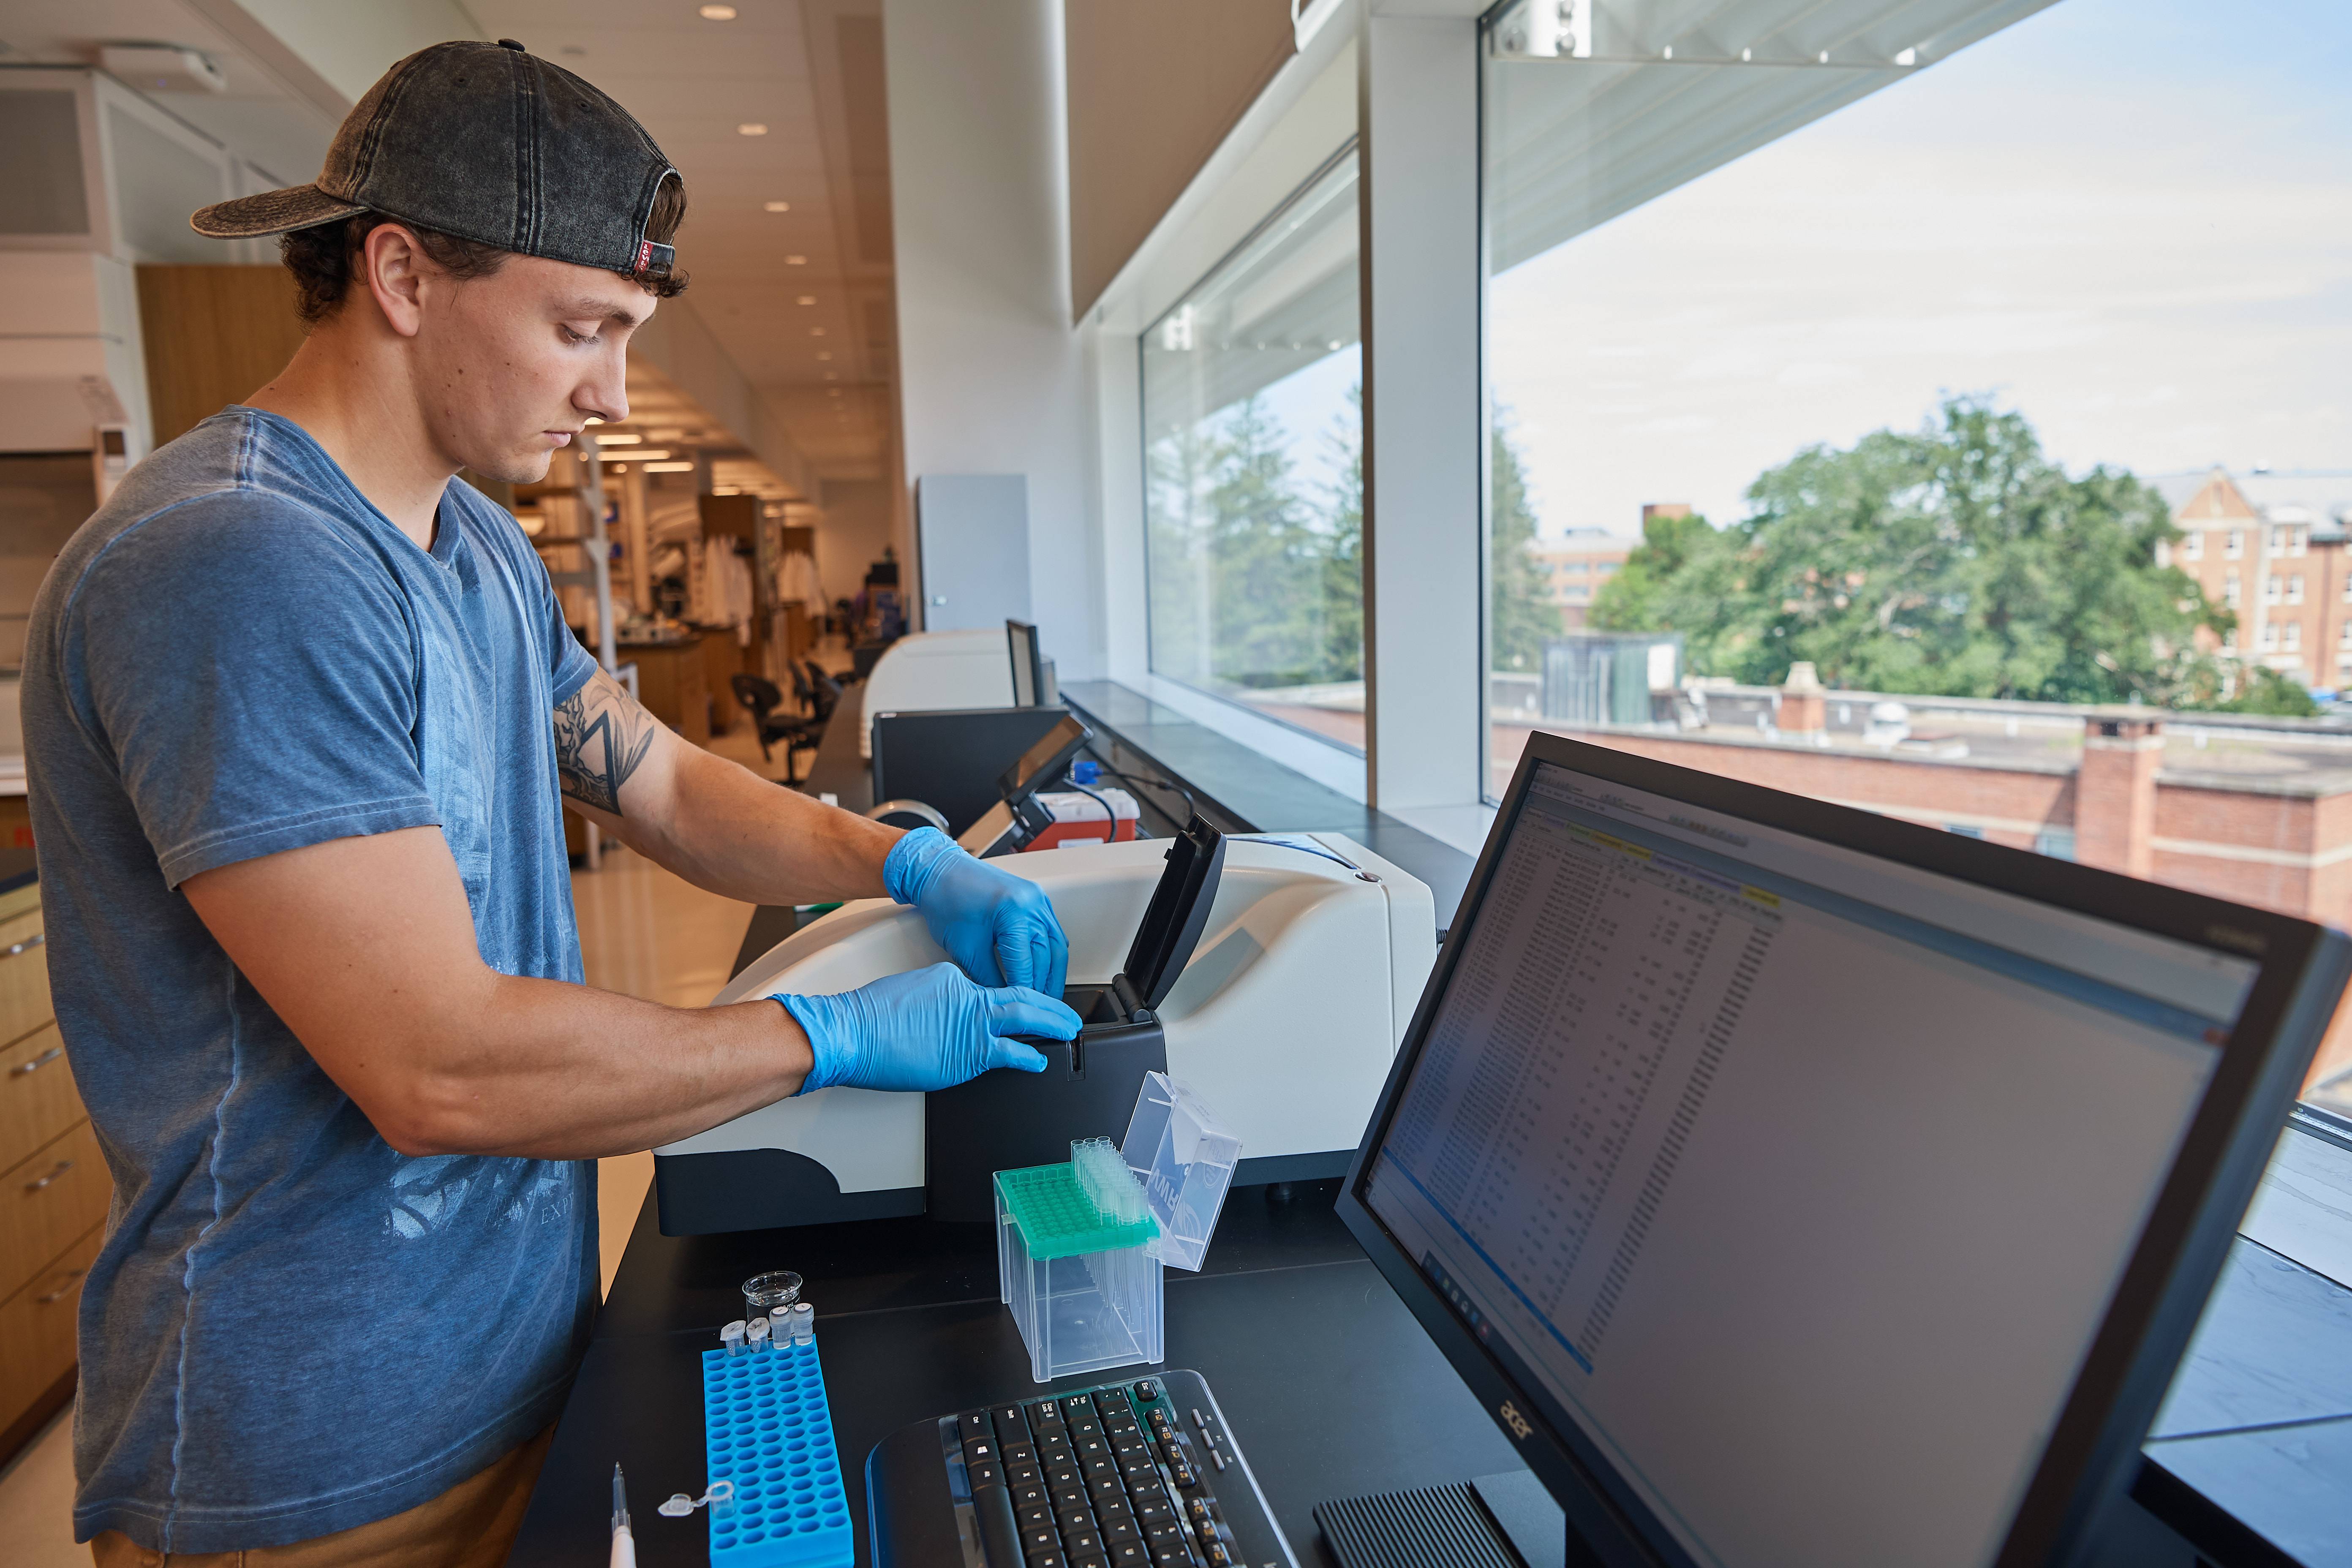 Ian Sands '20 (ENG) uses a device to characterize the size of nanoparticles in a lab at the Engineering Science Building on June 24, 2019. (Peter Morenus/UConn Photo)